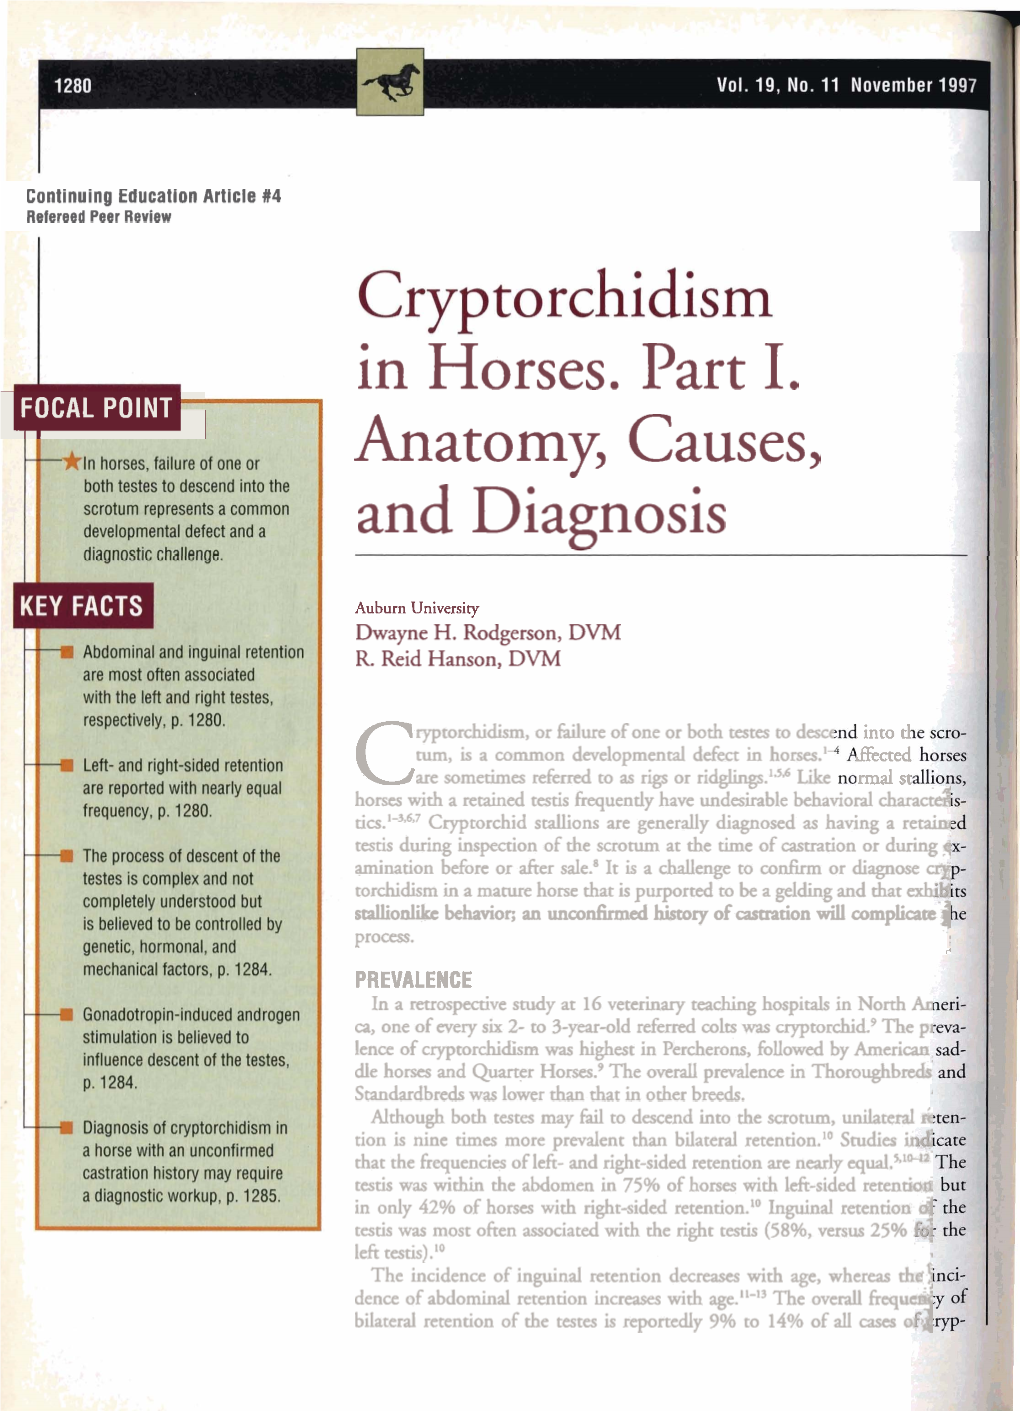 In Horses. Part I. Anatomy, Causes, and Diagnosis